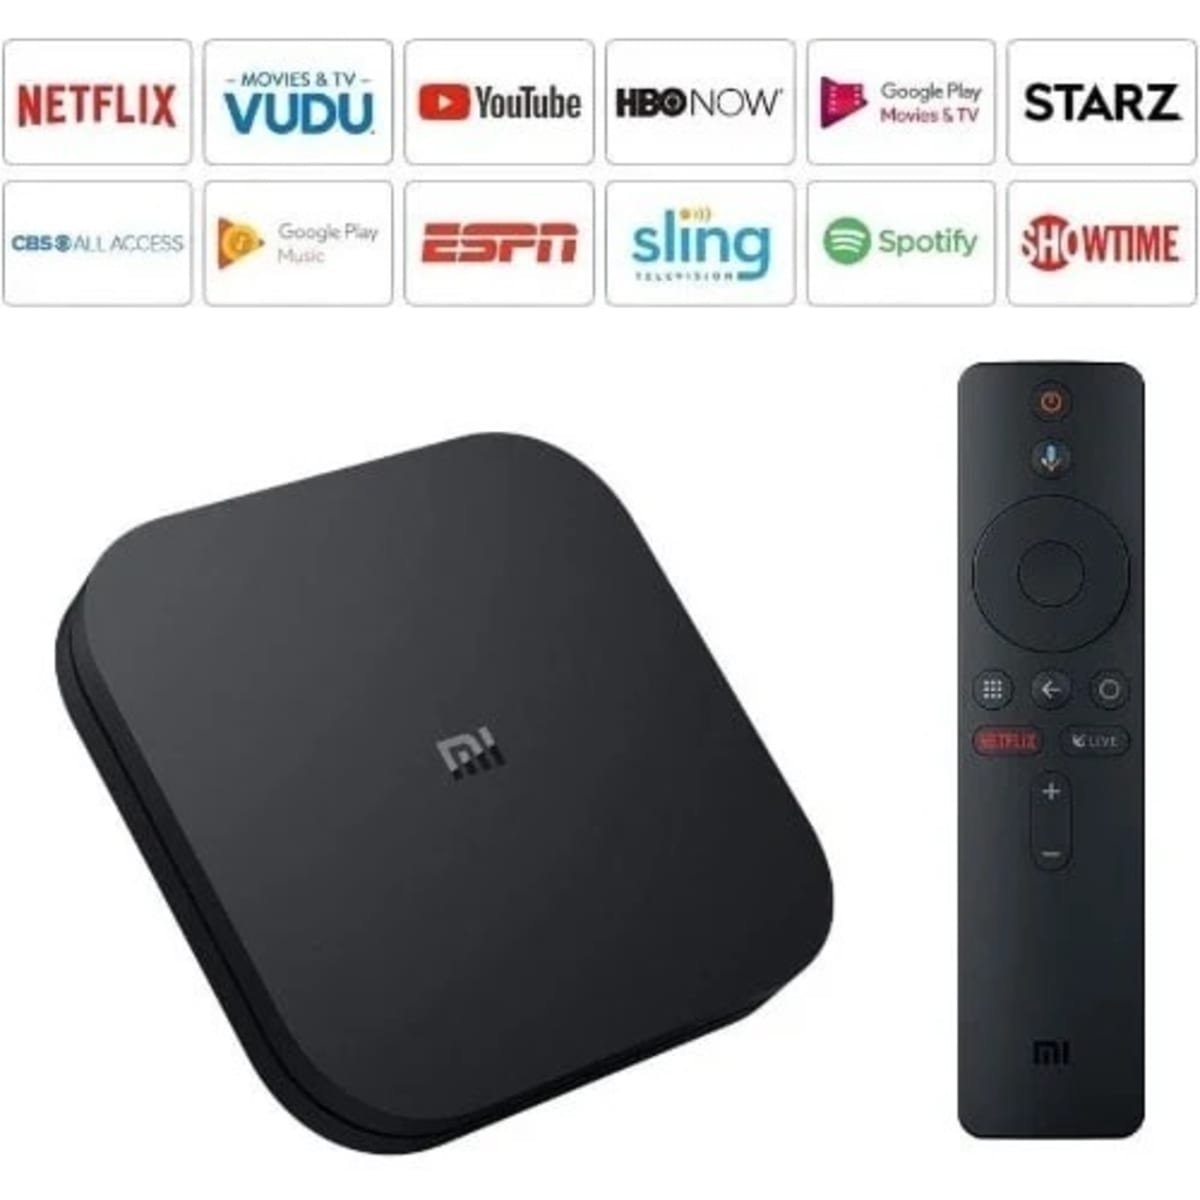 Google Android TV comes to new 4K HDR Xiaomi Mi Box S for $60 - CNET